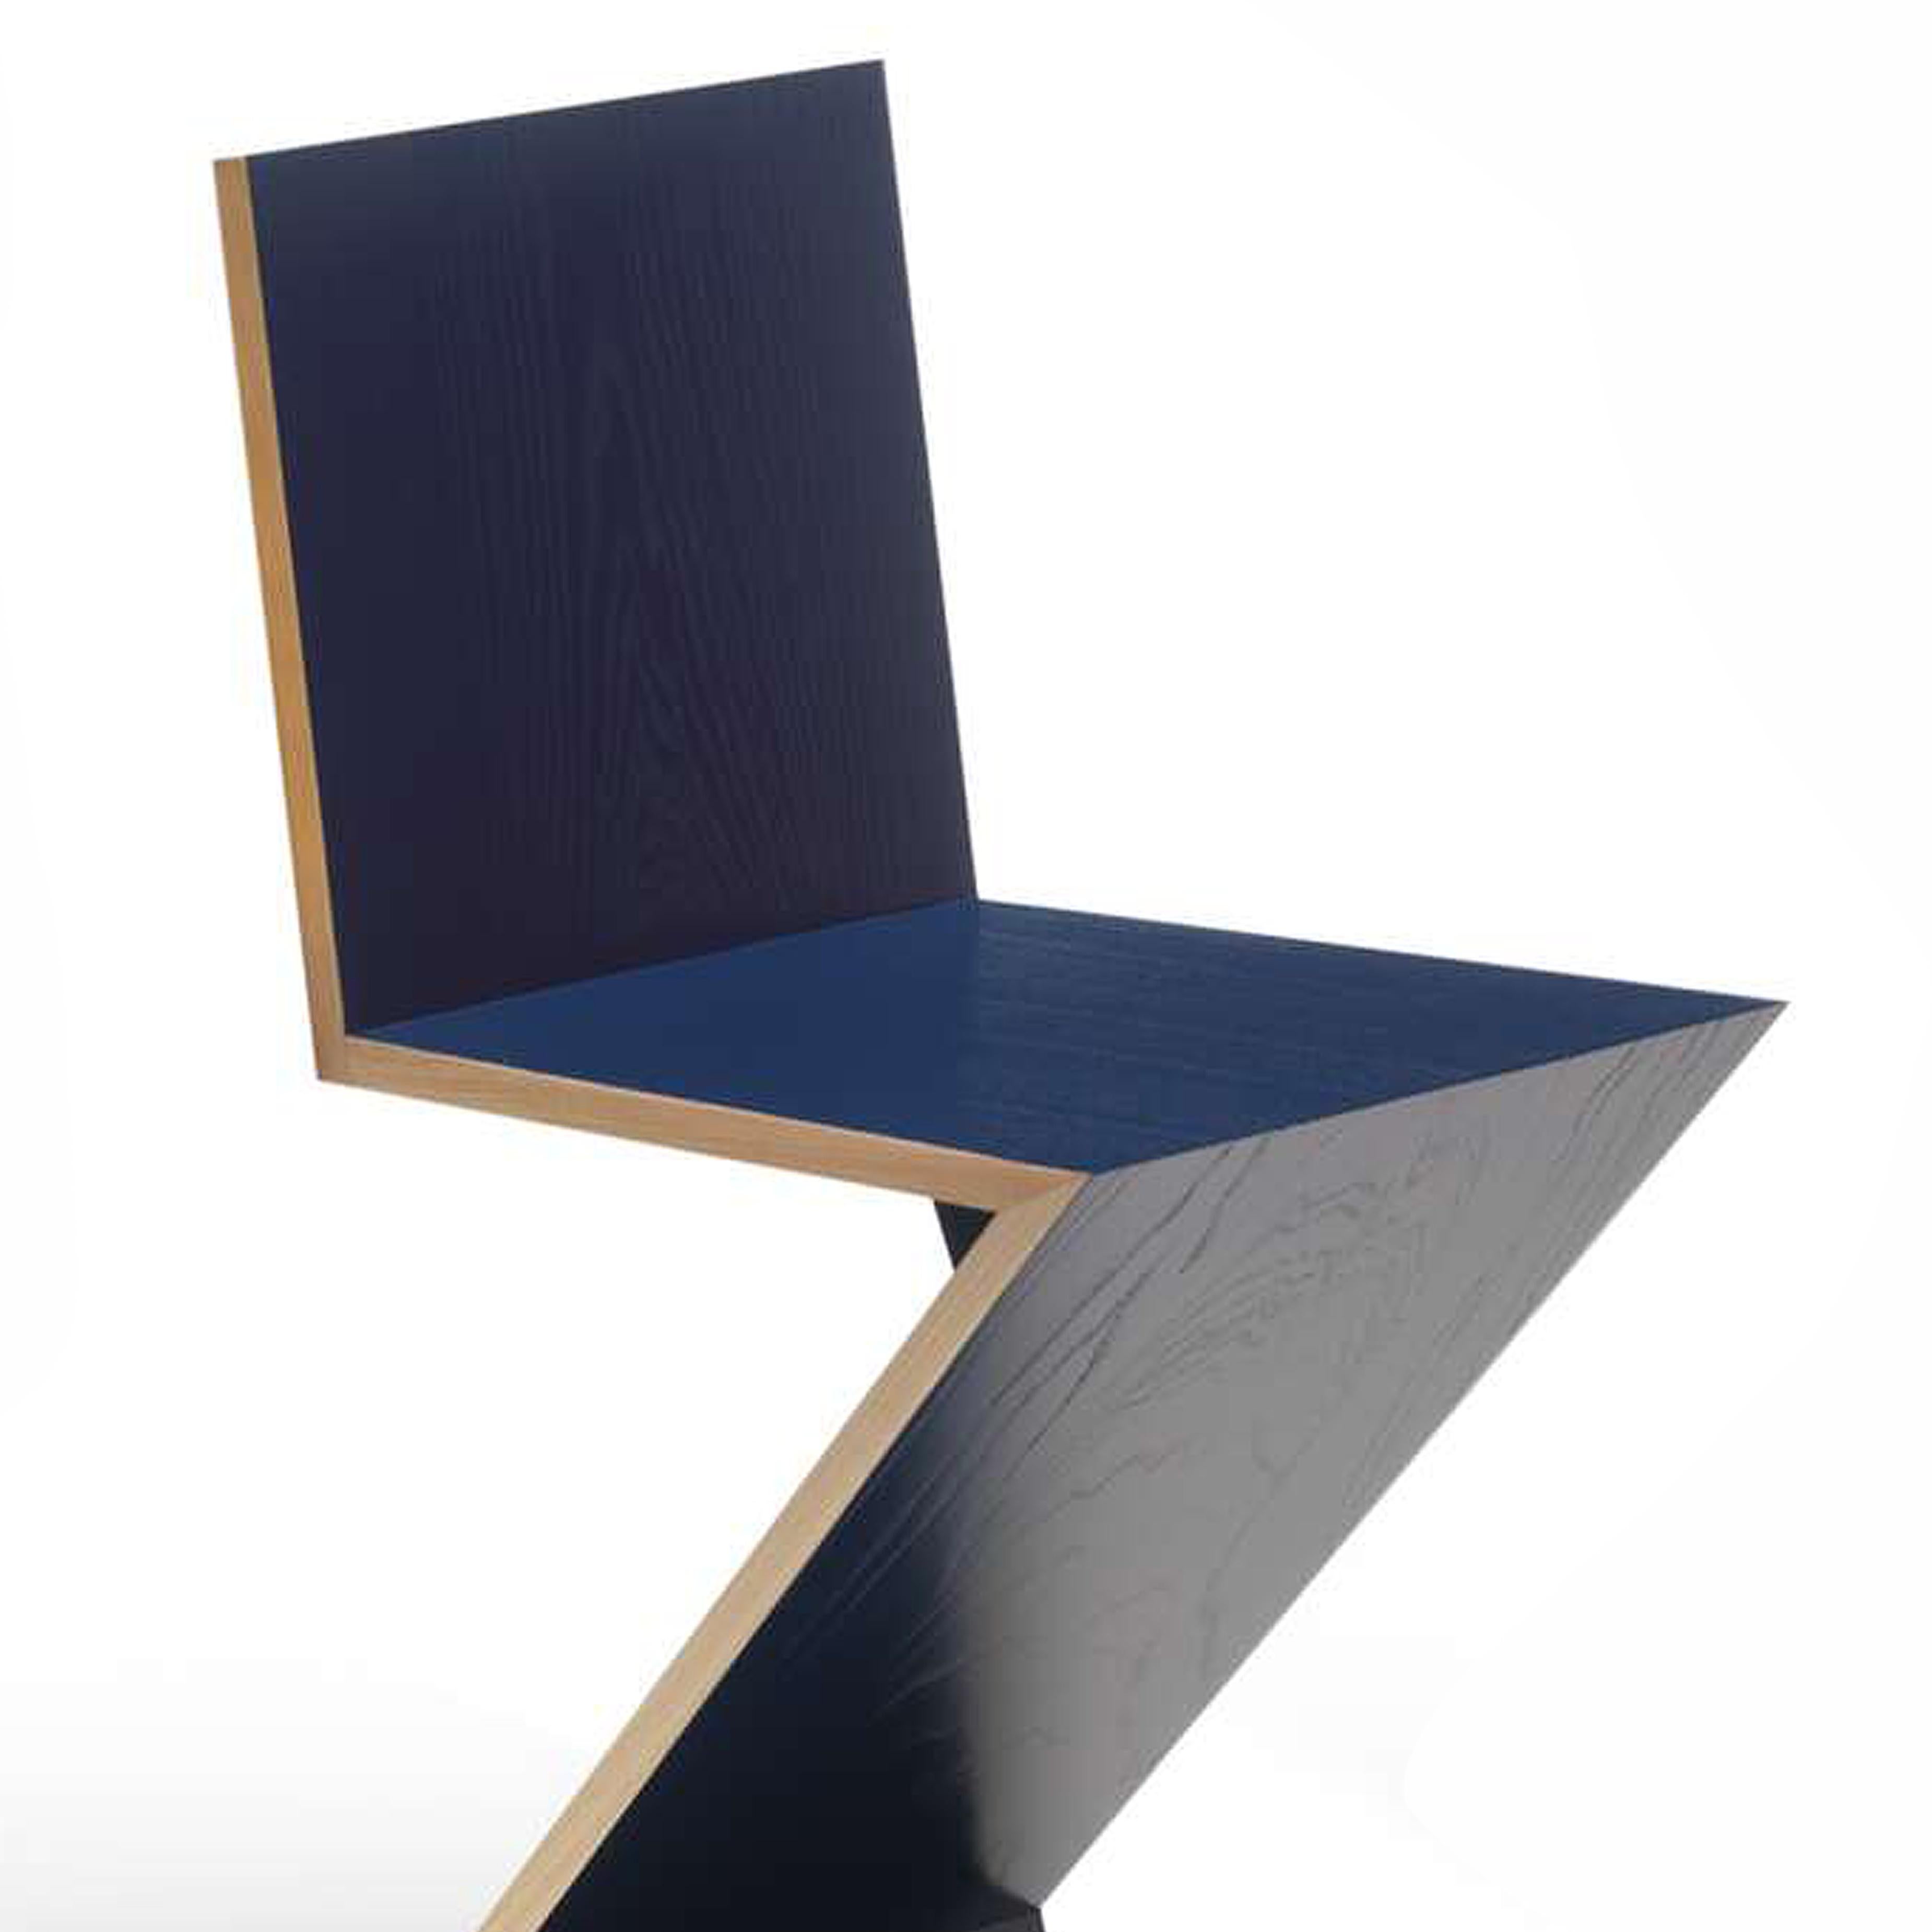 Chair designed by Gerrit Thomas Rietveld in 1934. Relaunched in 1973/ 2011.
Manufactured by Cassina in Italy.

Designed by Gerrit Rietveld, this chair provided an early example of a cantilevered seat, and is composed of four wood boards